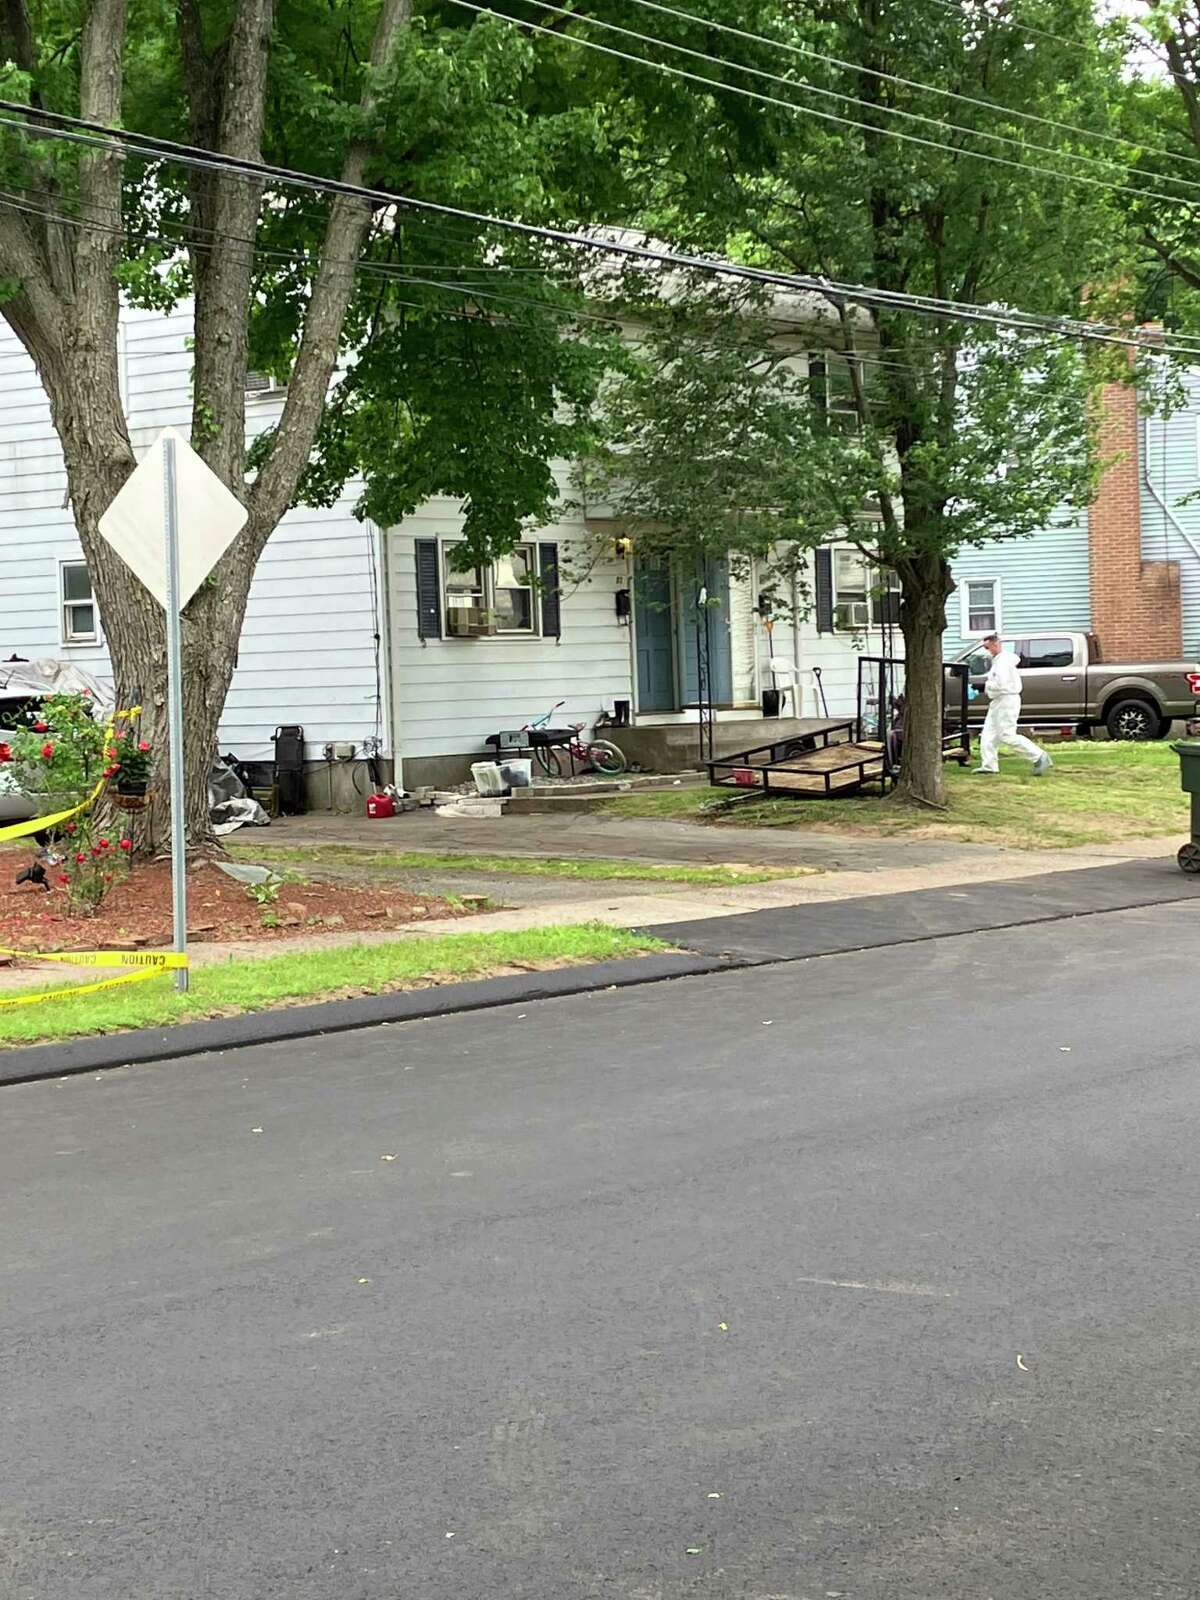 Police taped off an area Thursday, June 16, 2022 near a home on Graham Road in East Hartford where they said two people were shot during a home invasion. Both were later pronounced dead, according to police.